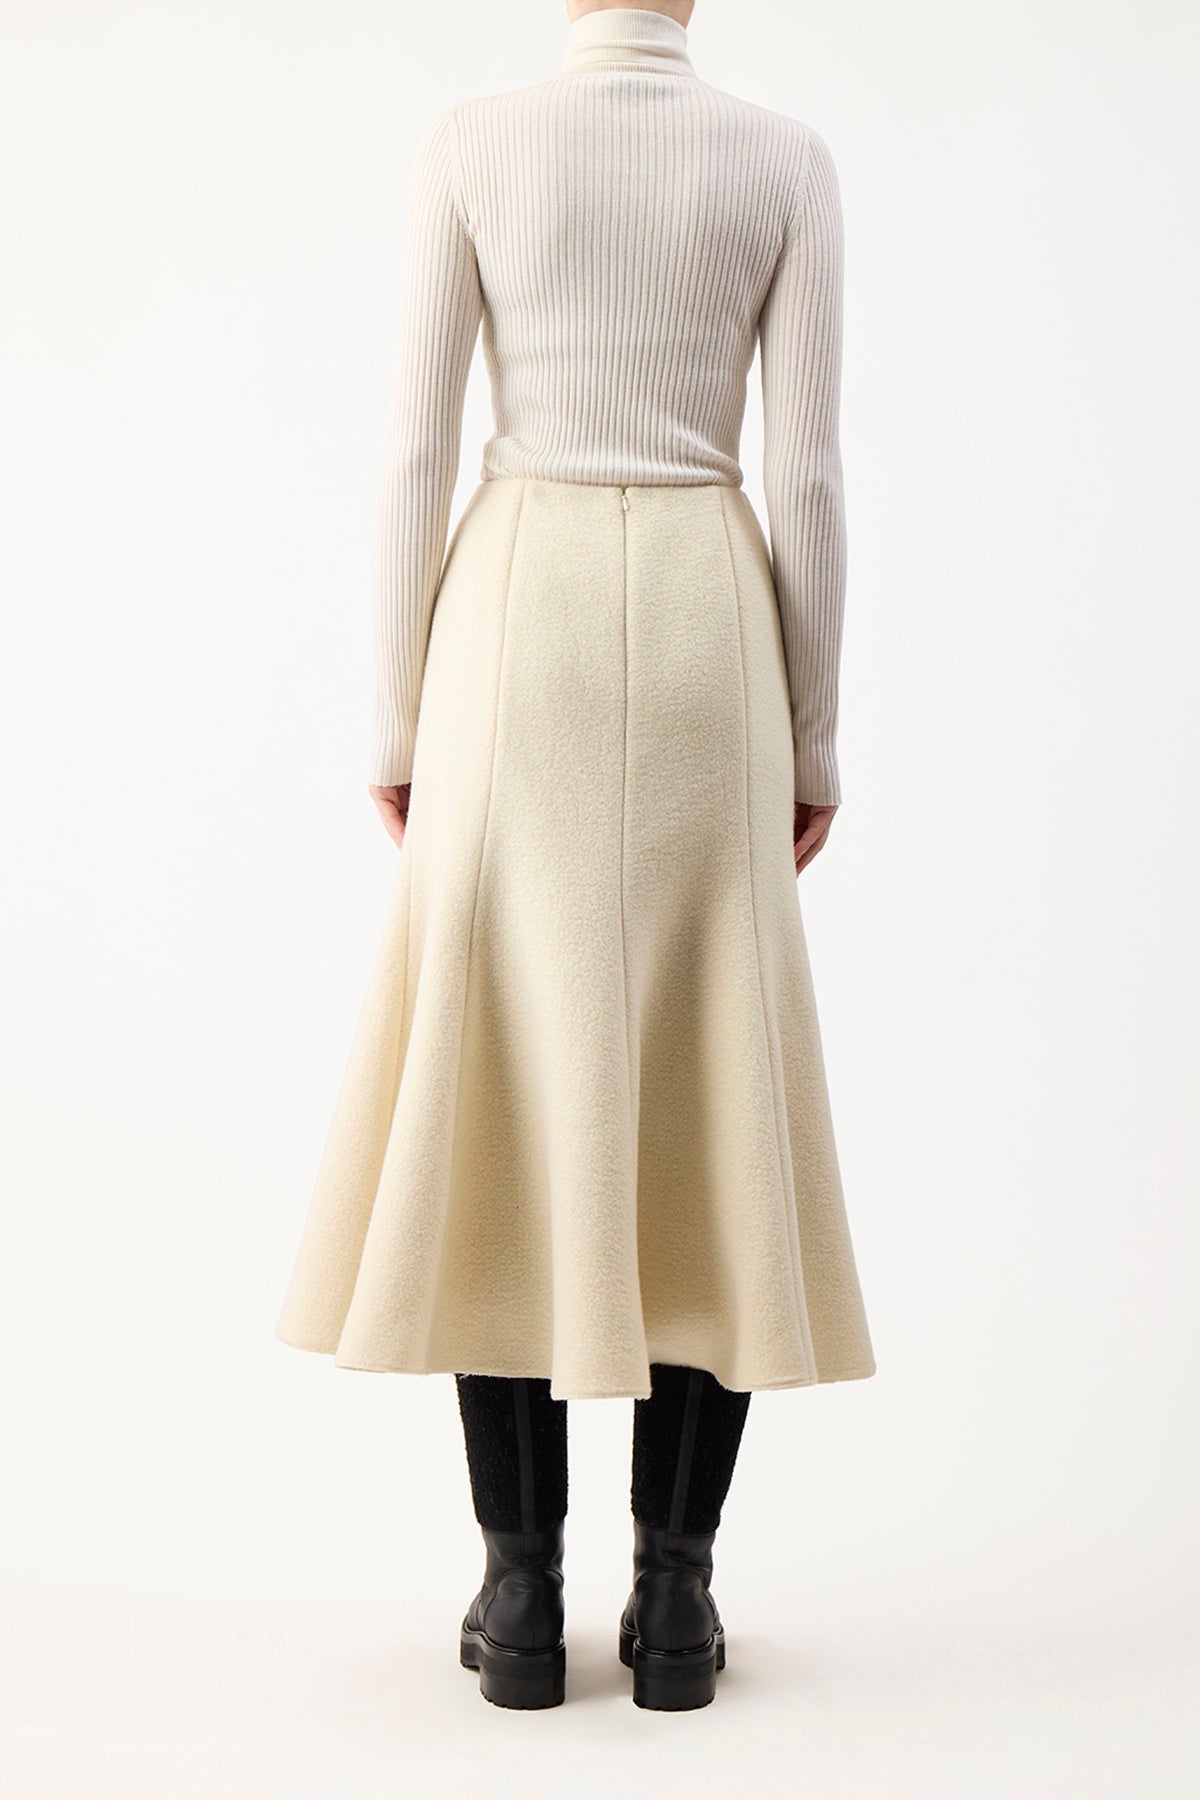 Amy Skirt in Recycled Cashmere Felt - 4